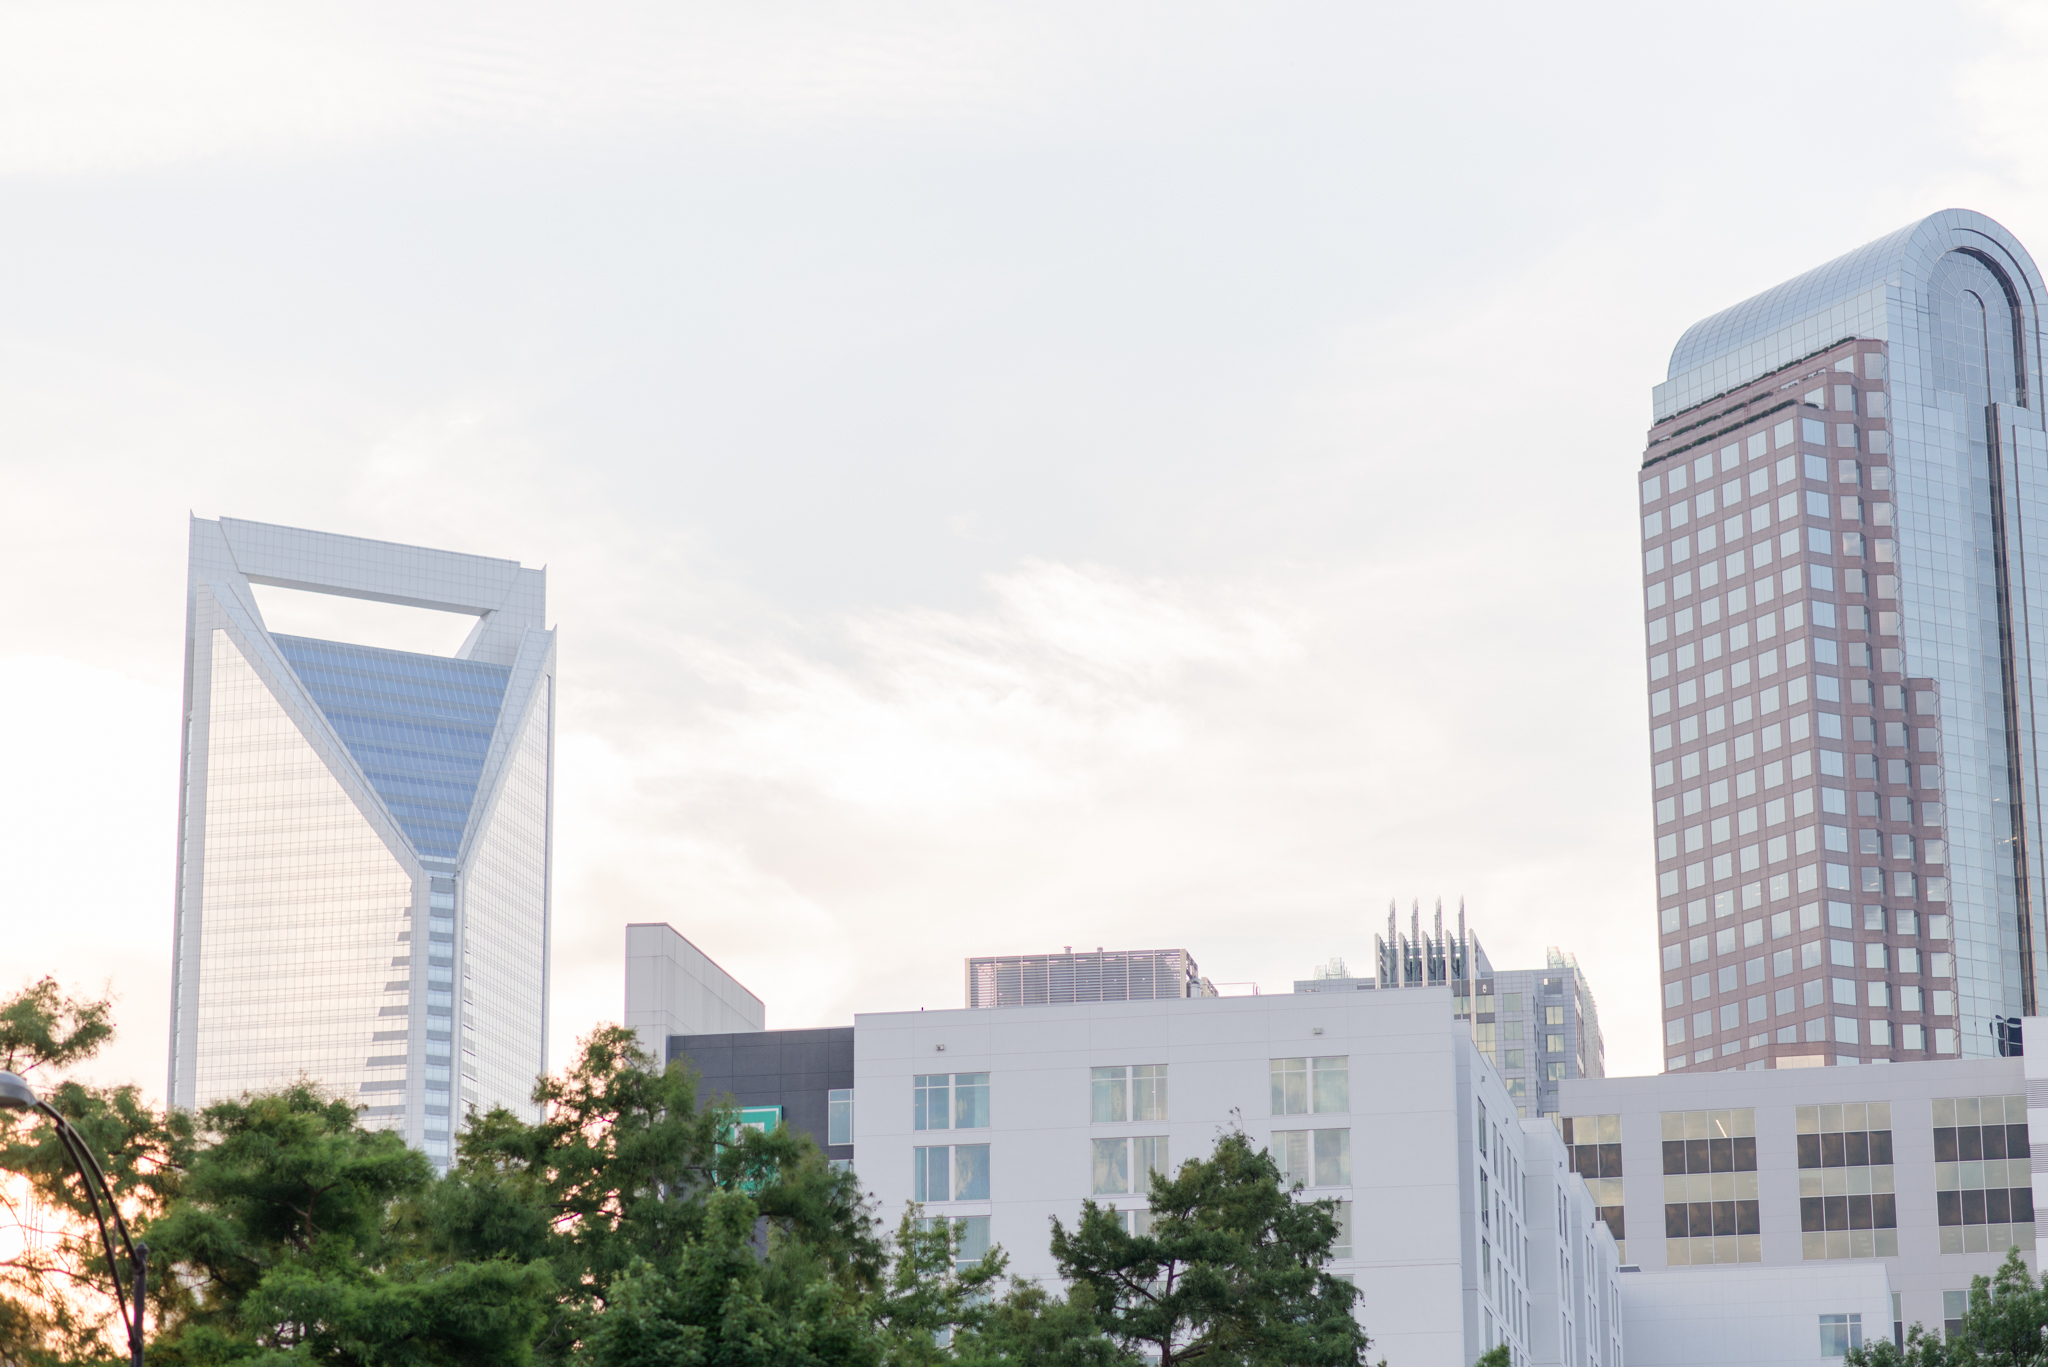 skyline for uptown charlotte nc